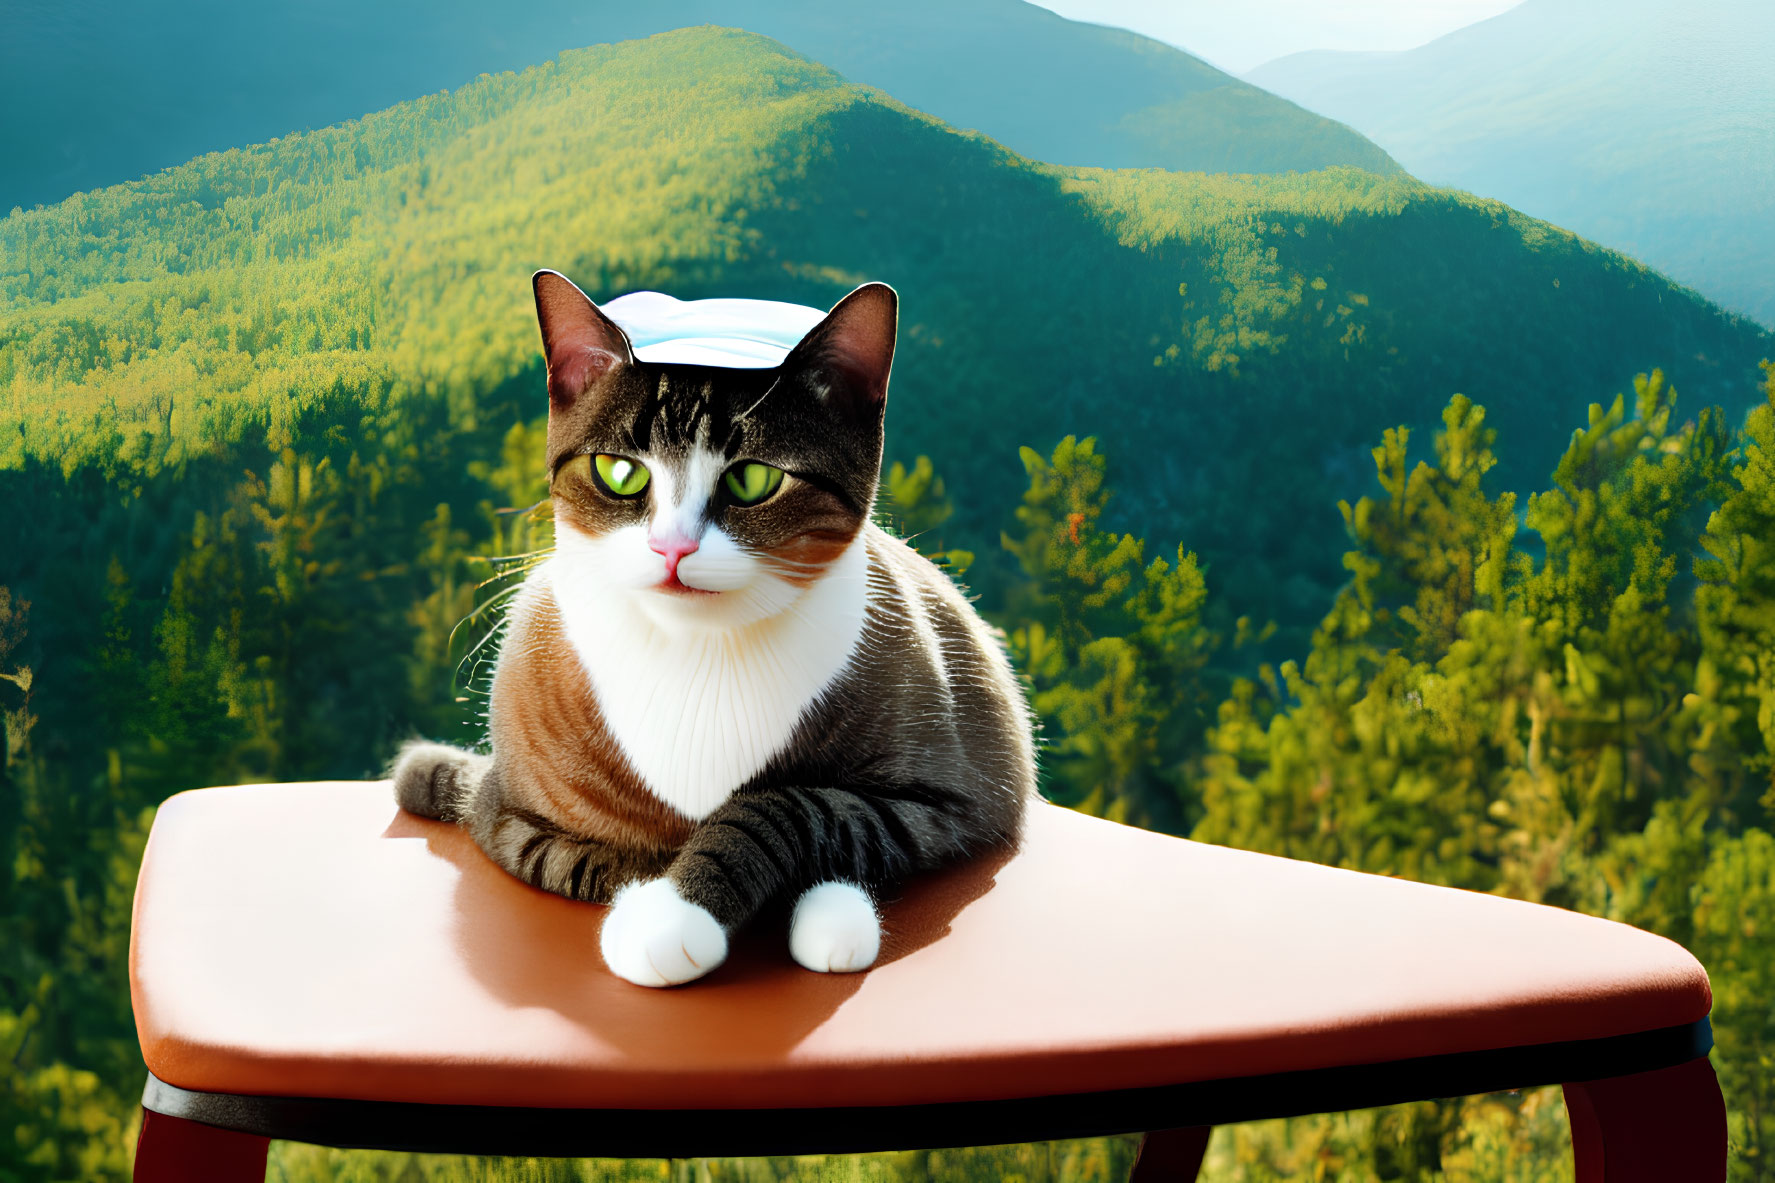 Brown and White Cat with Nurse's Cap on Table in Forest Setting